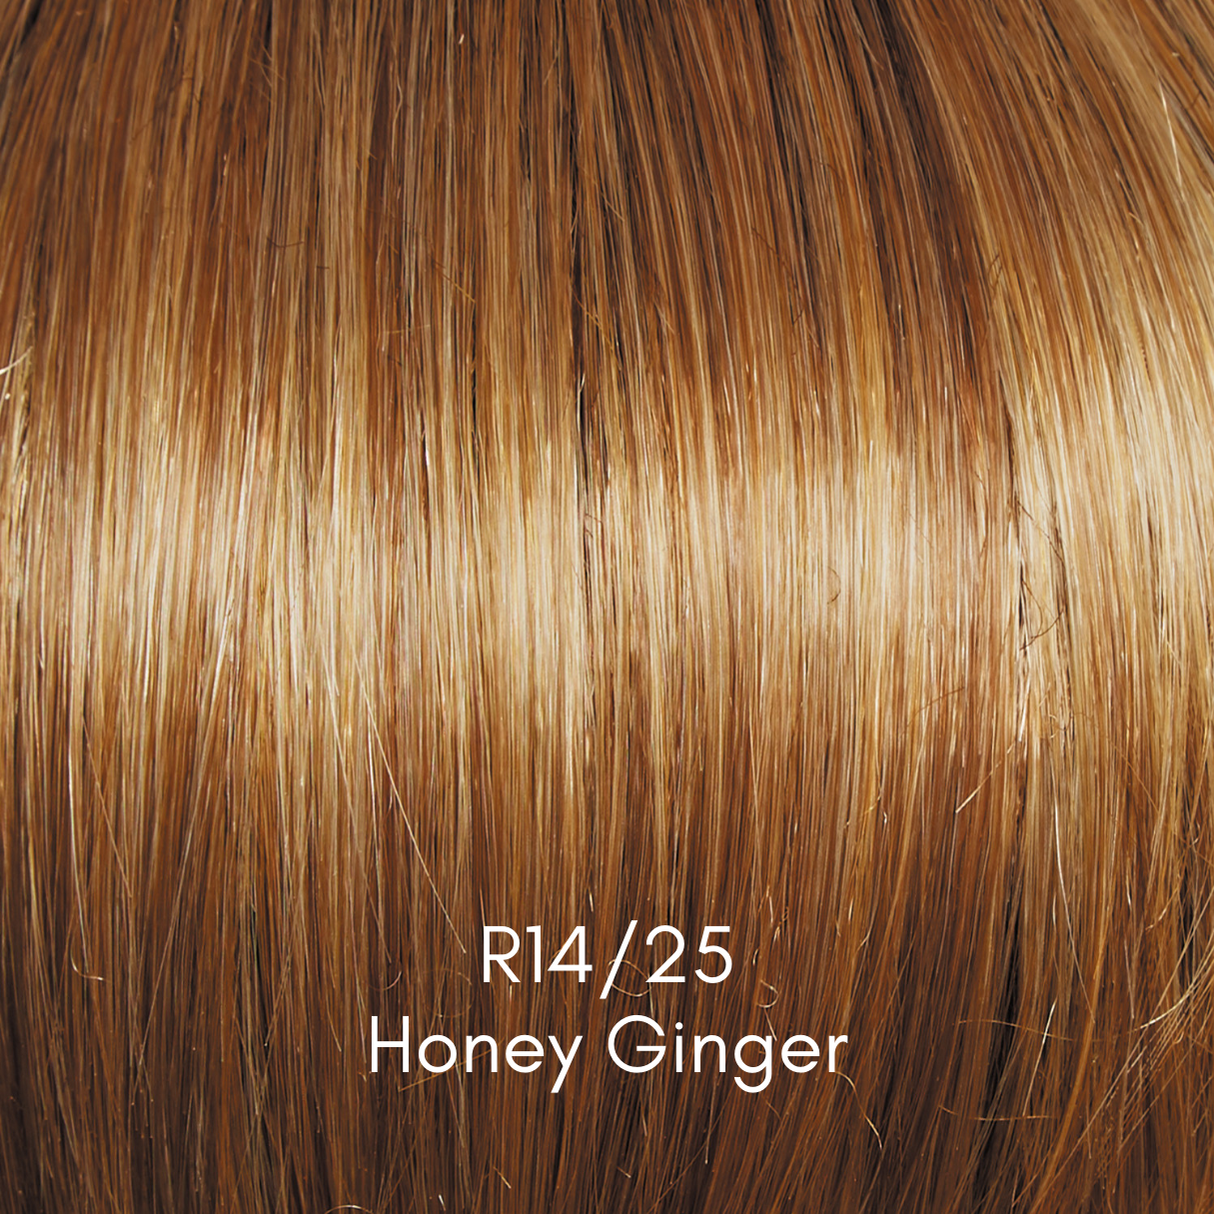 Cinch - Signature Wig Collection by Raquel Welch